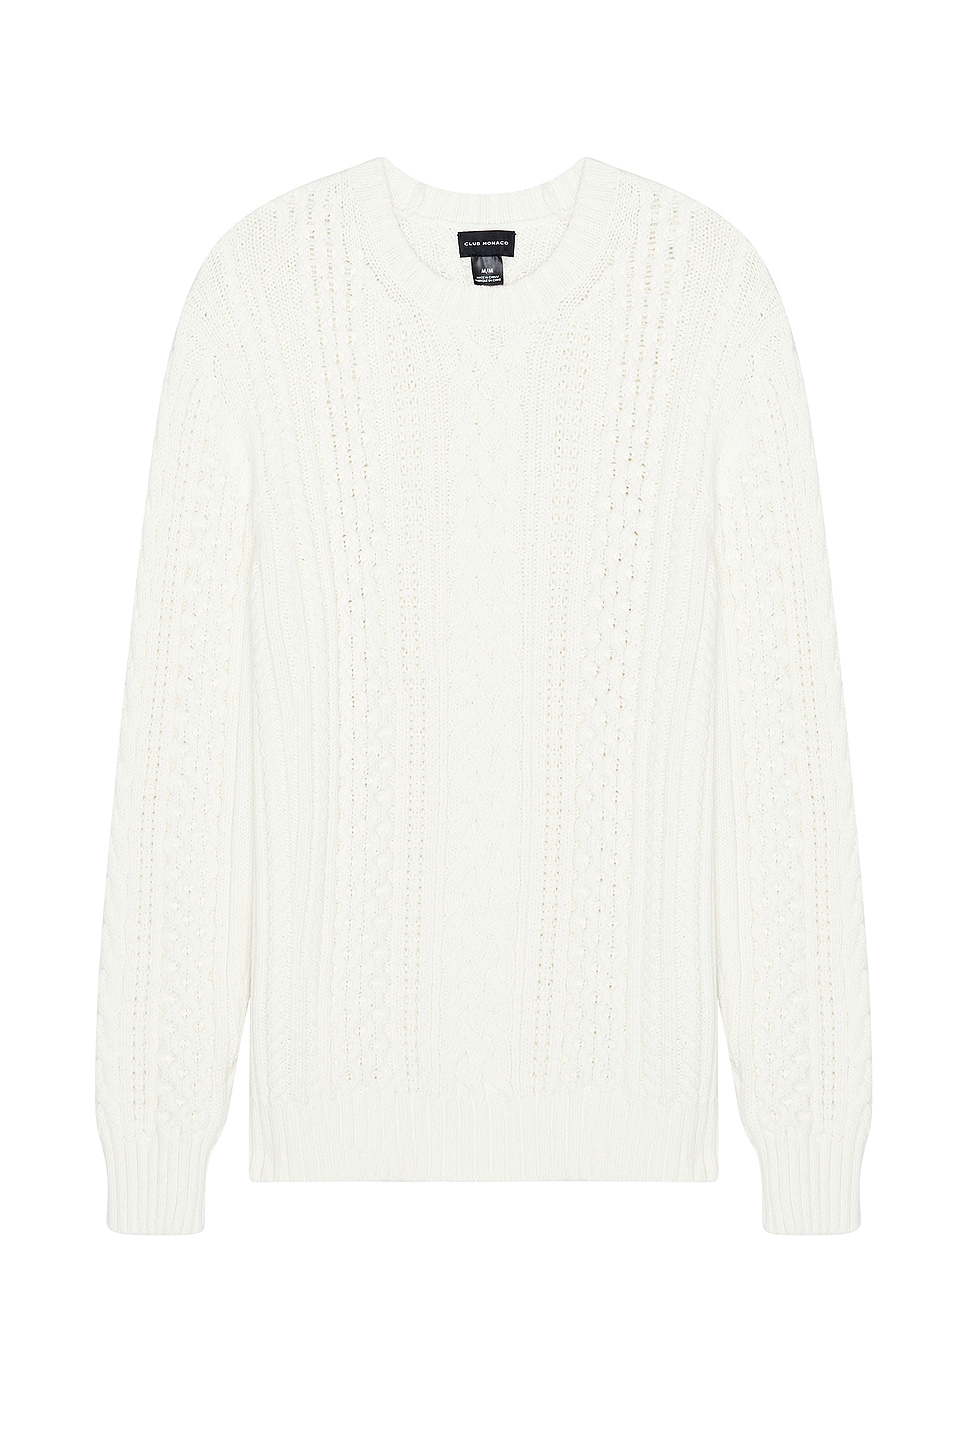 Image 1 of Club Monaco Large Cable Crew Sweater in Egret